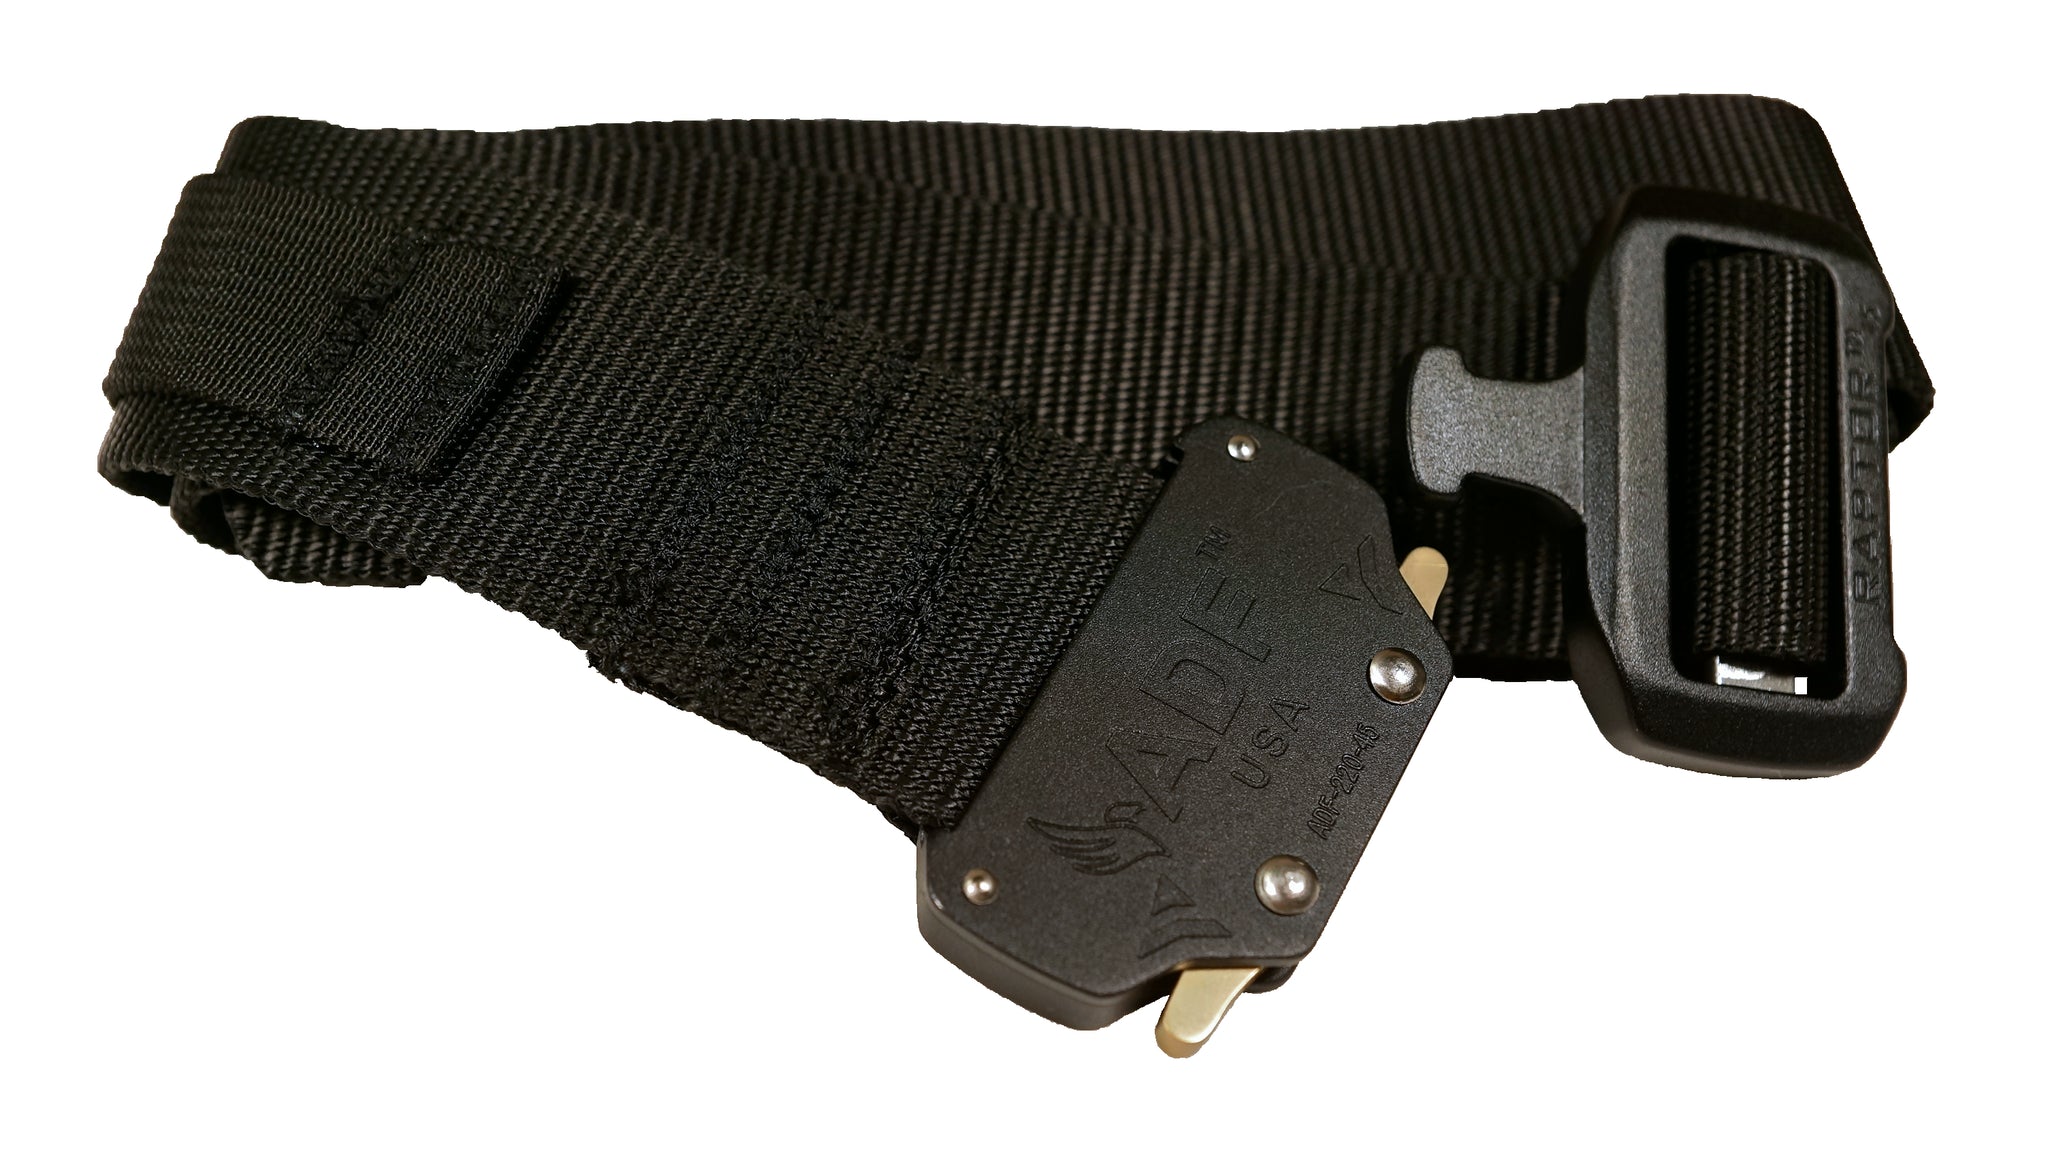 Black rigger’s style belt with added nylon loop and metal hook to secure a ThermoLuminescent Dosimeter or TLD.